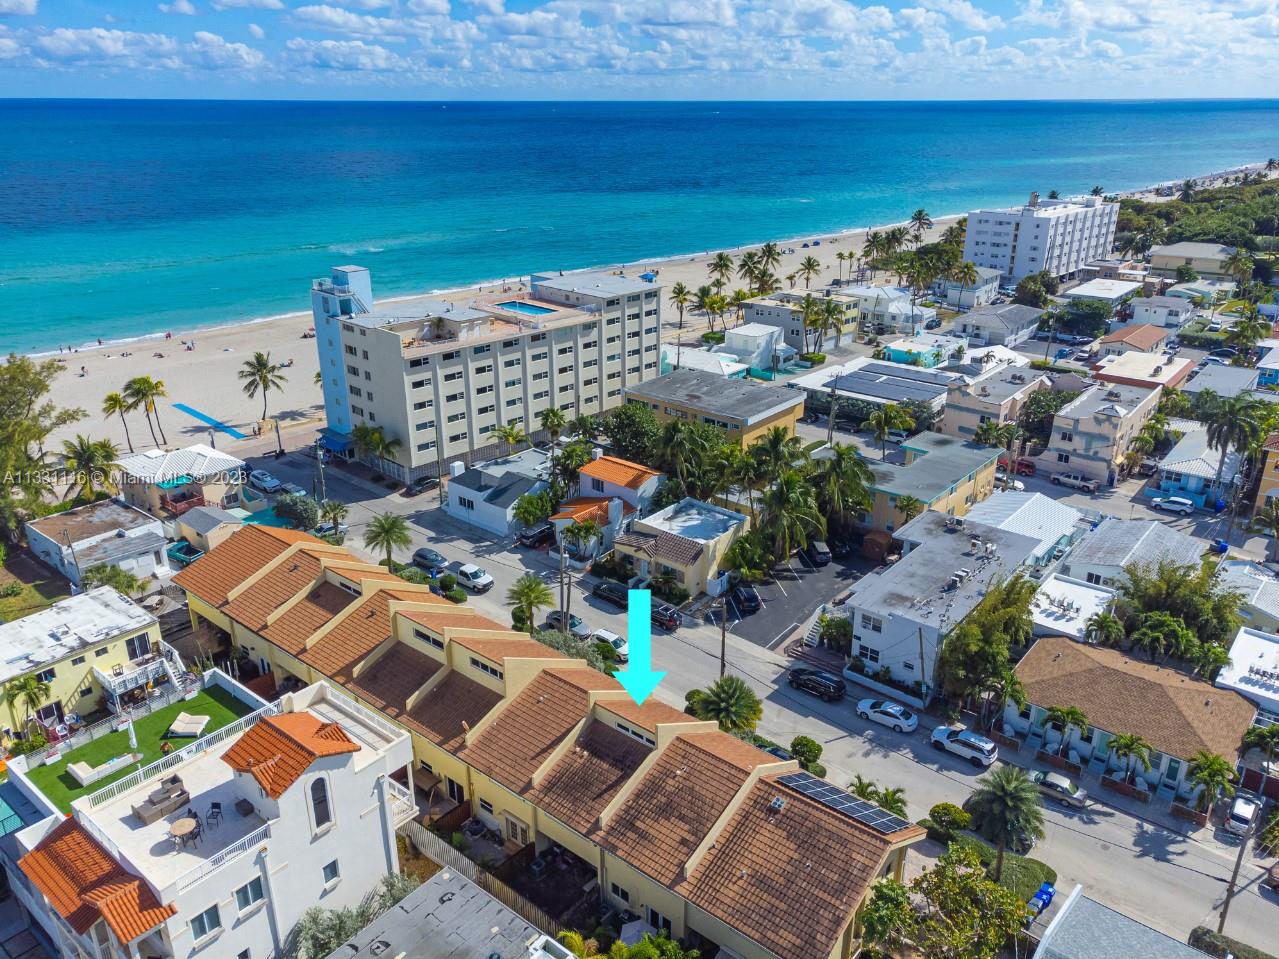 Incredible location just a few yards from the Famous Hollywood Beach Broadwalk and Ocean!